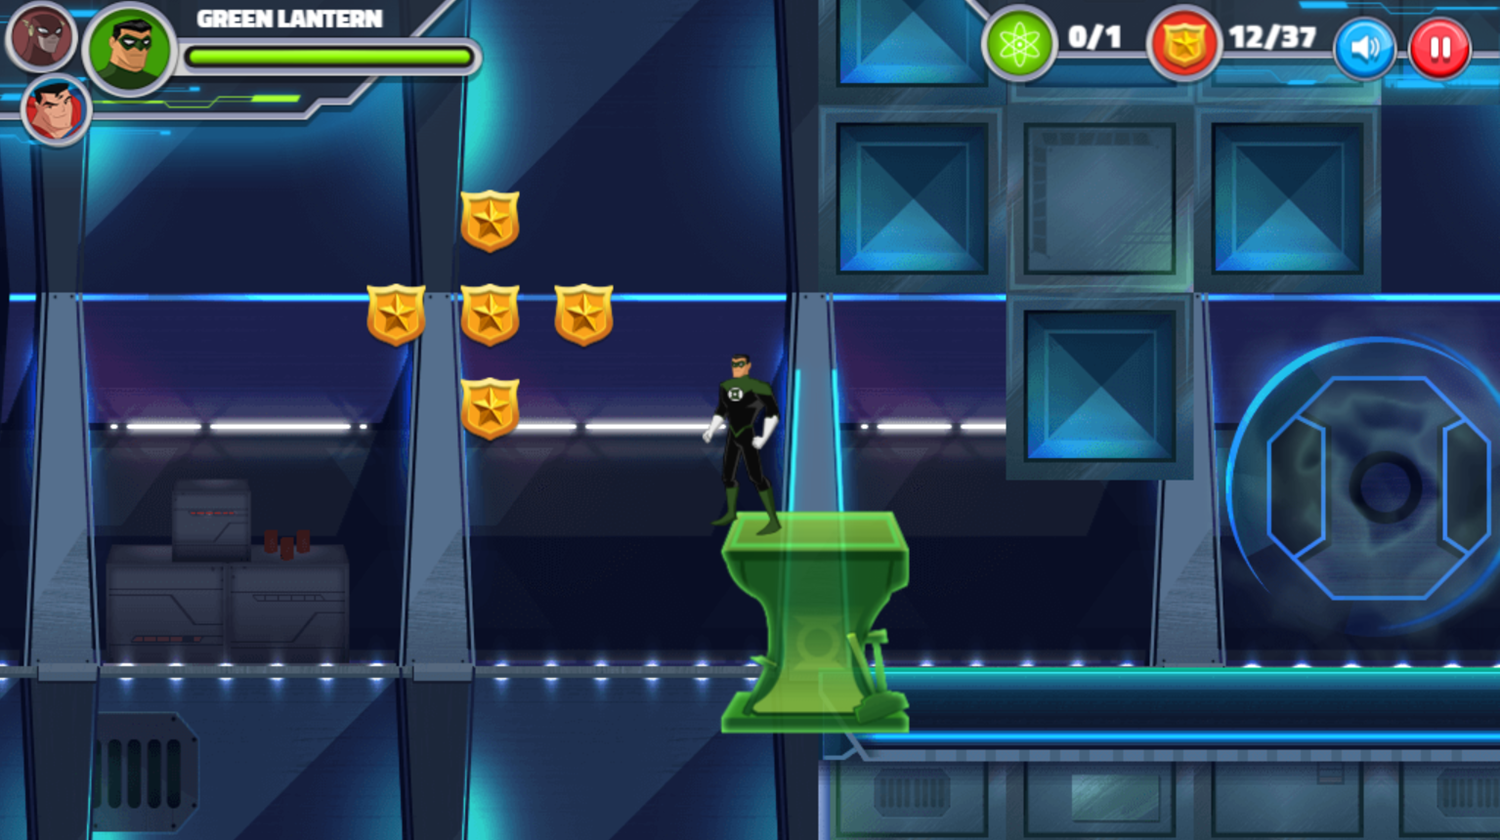 Justice League Action Nuclear Rescue Game Platforming Screenshot.